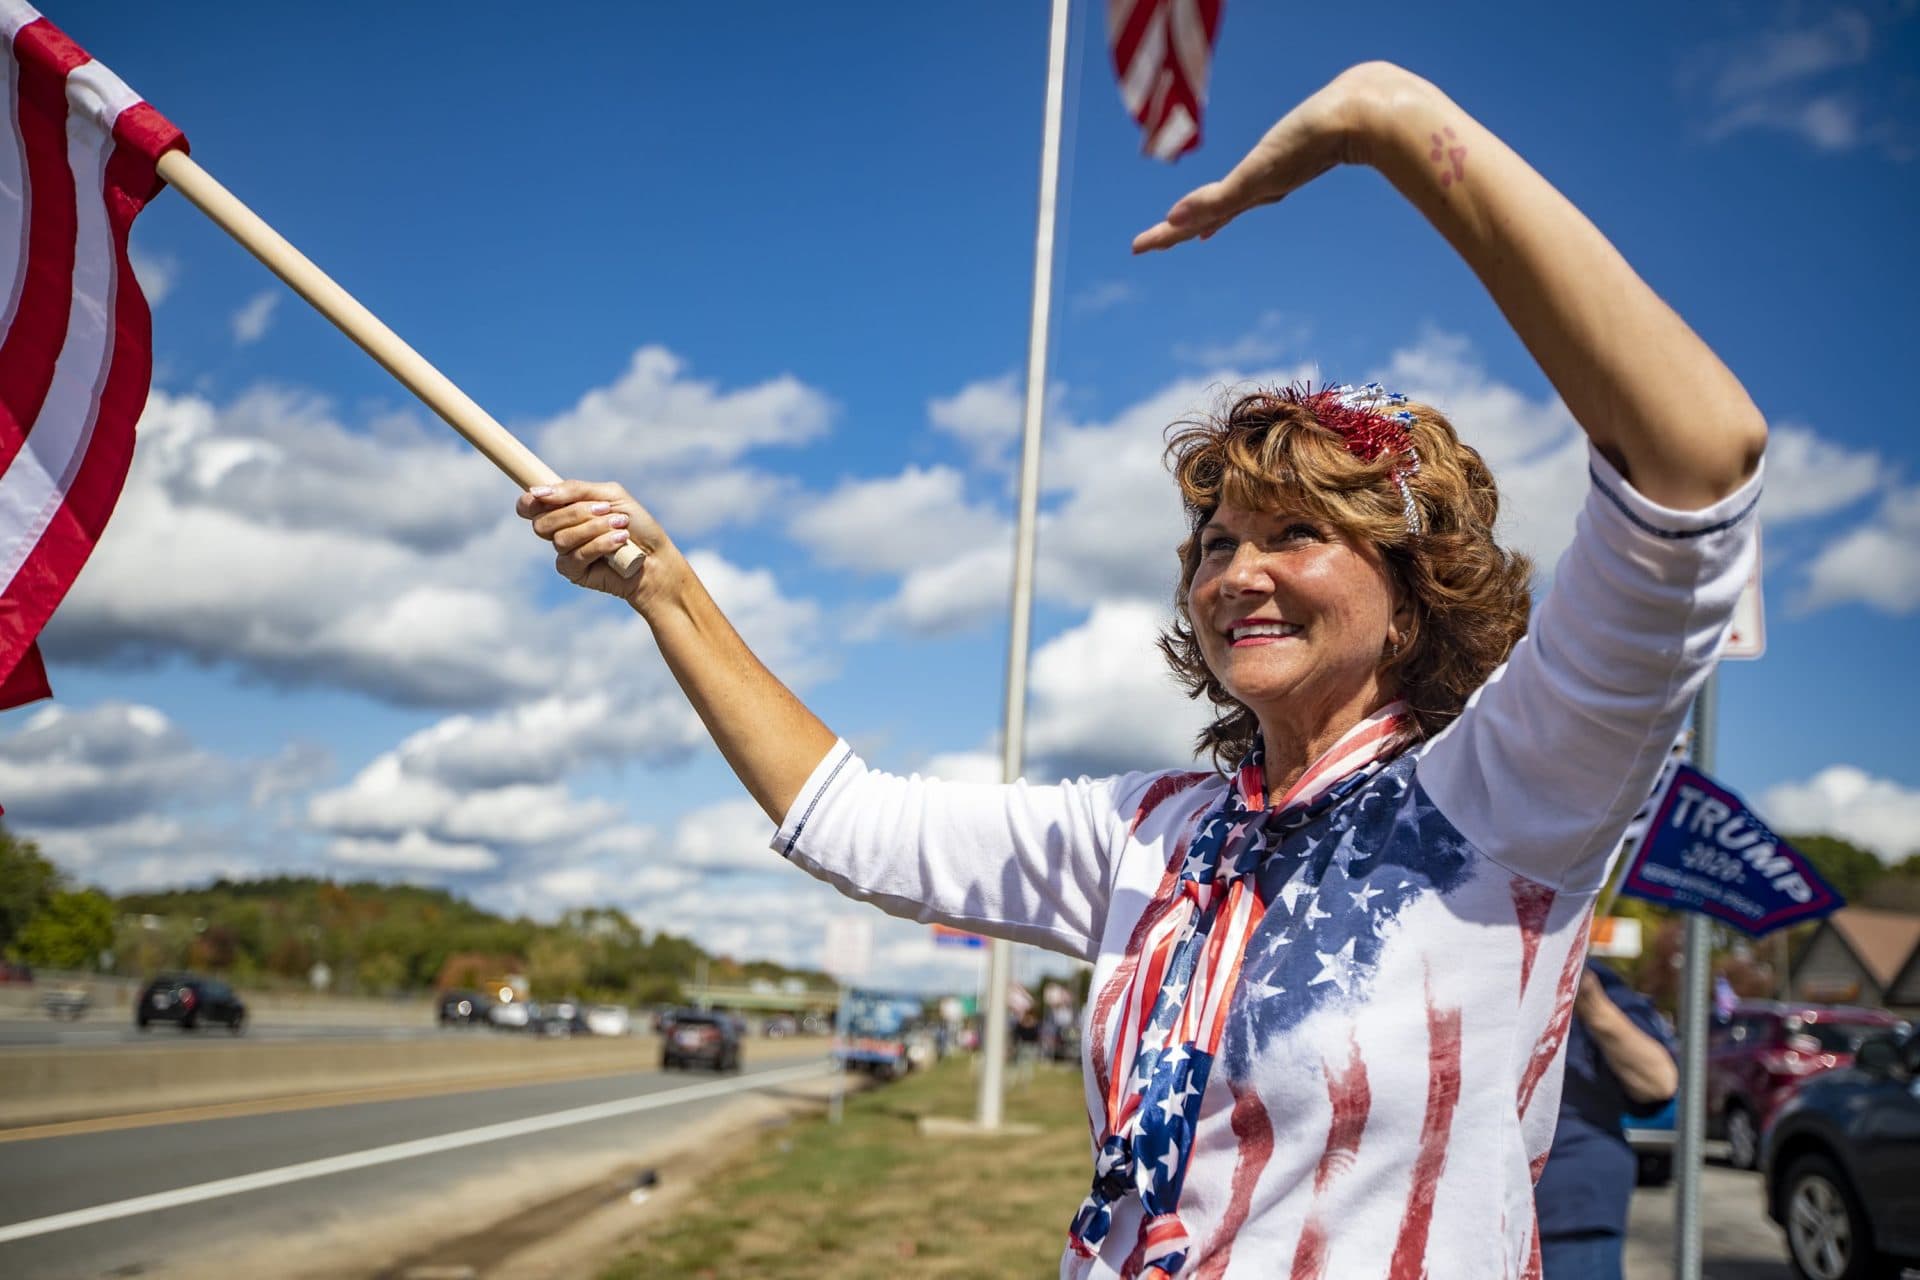 Grace Lincoln holds a flag and waves to passing driver on 95 at the Lexington Serve Center during the Trump Train caravan. (Jesse Costa/WBUR)